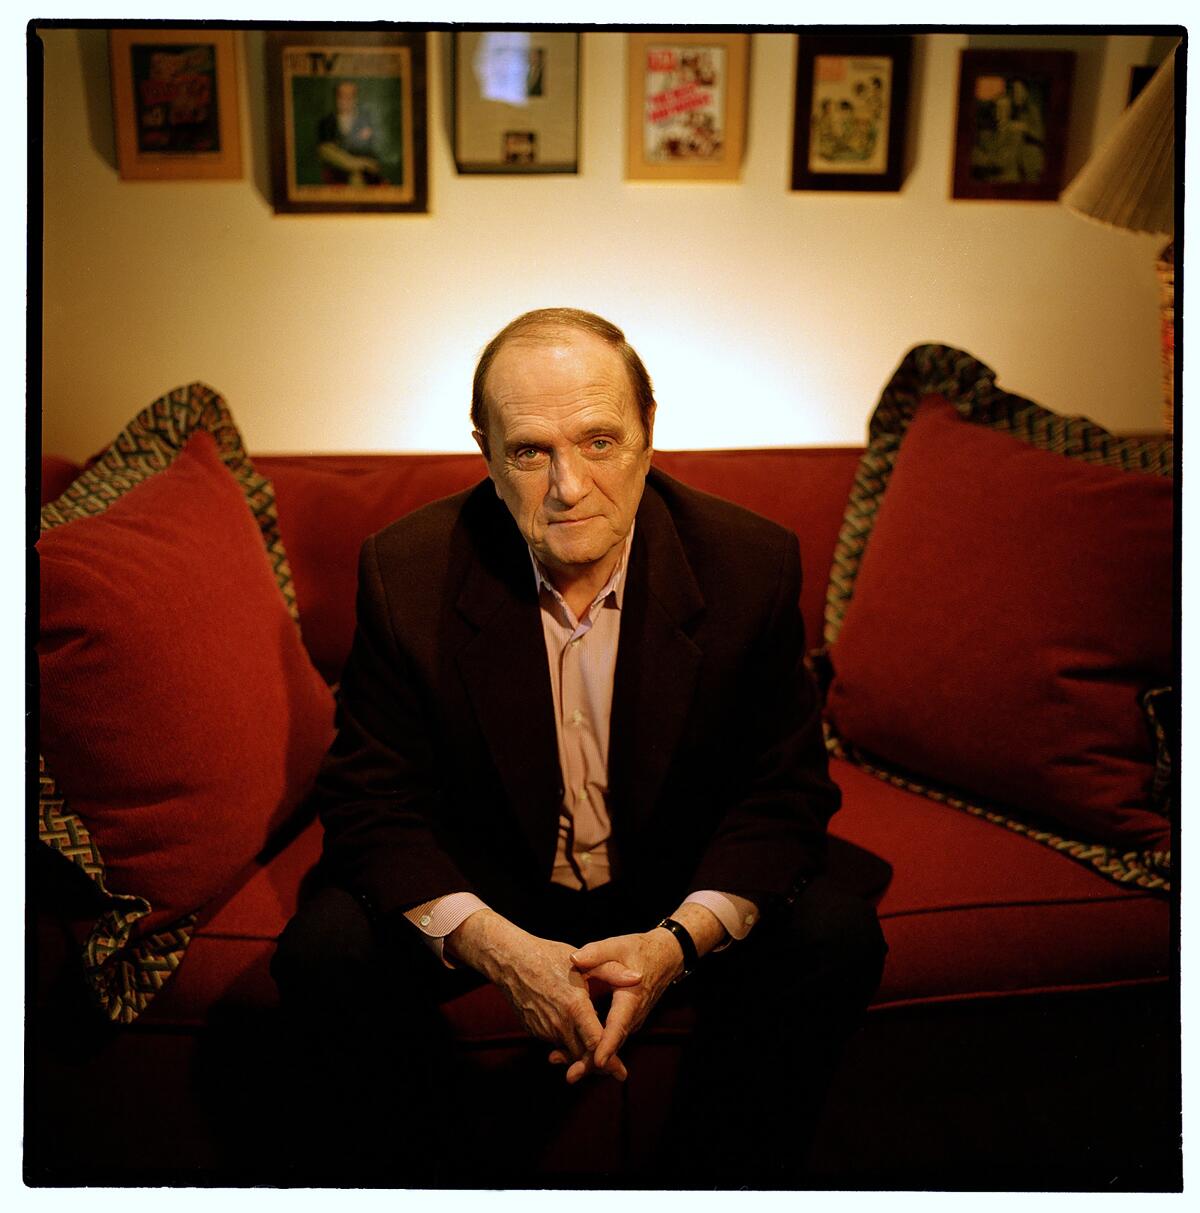 Bob Newhart sitting on a red sofa with his hands together wearing a black suit and open-collar shirt